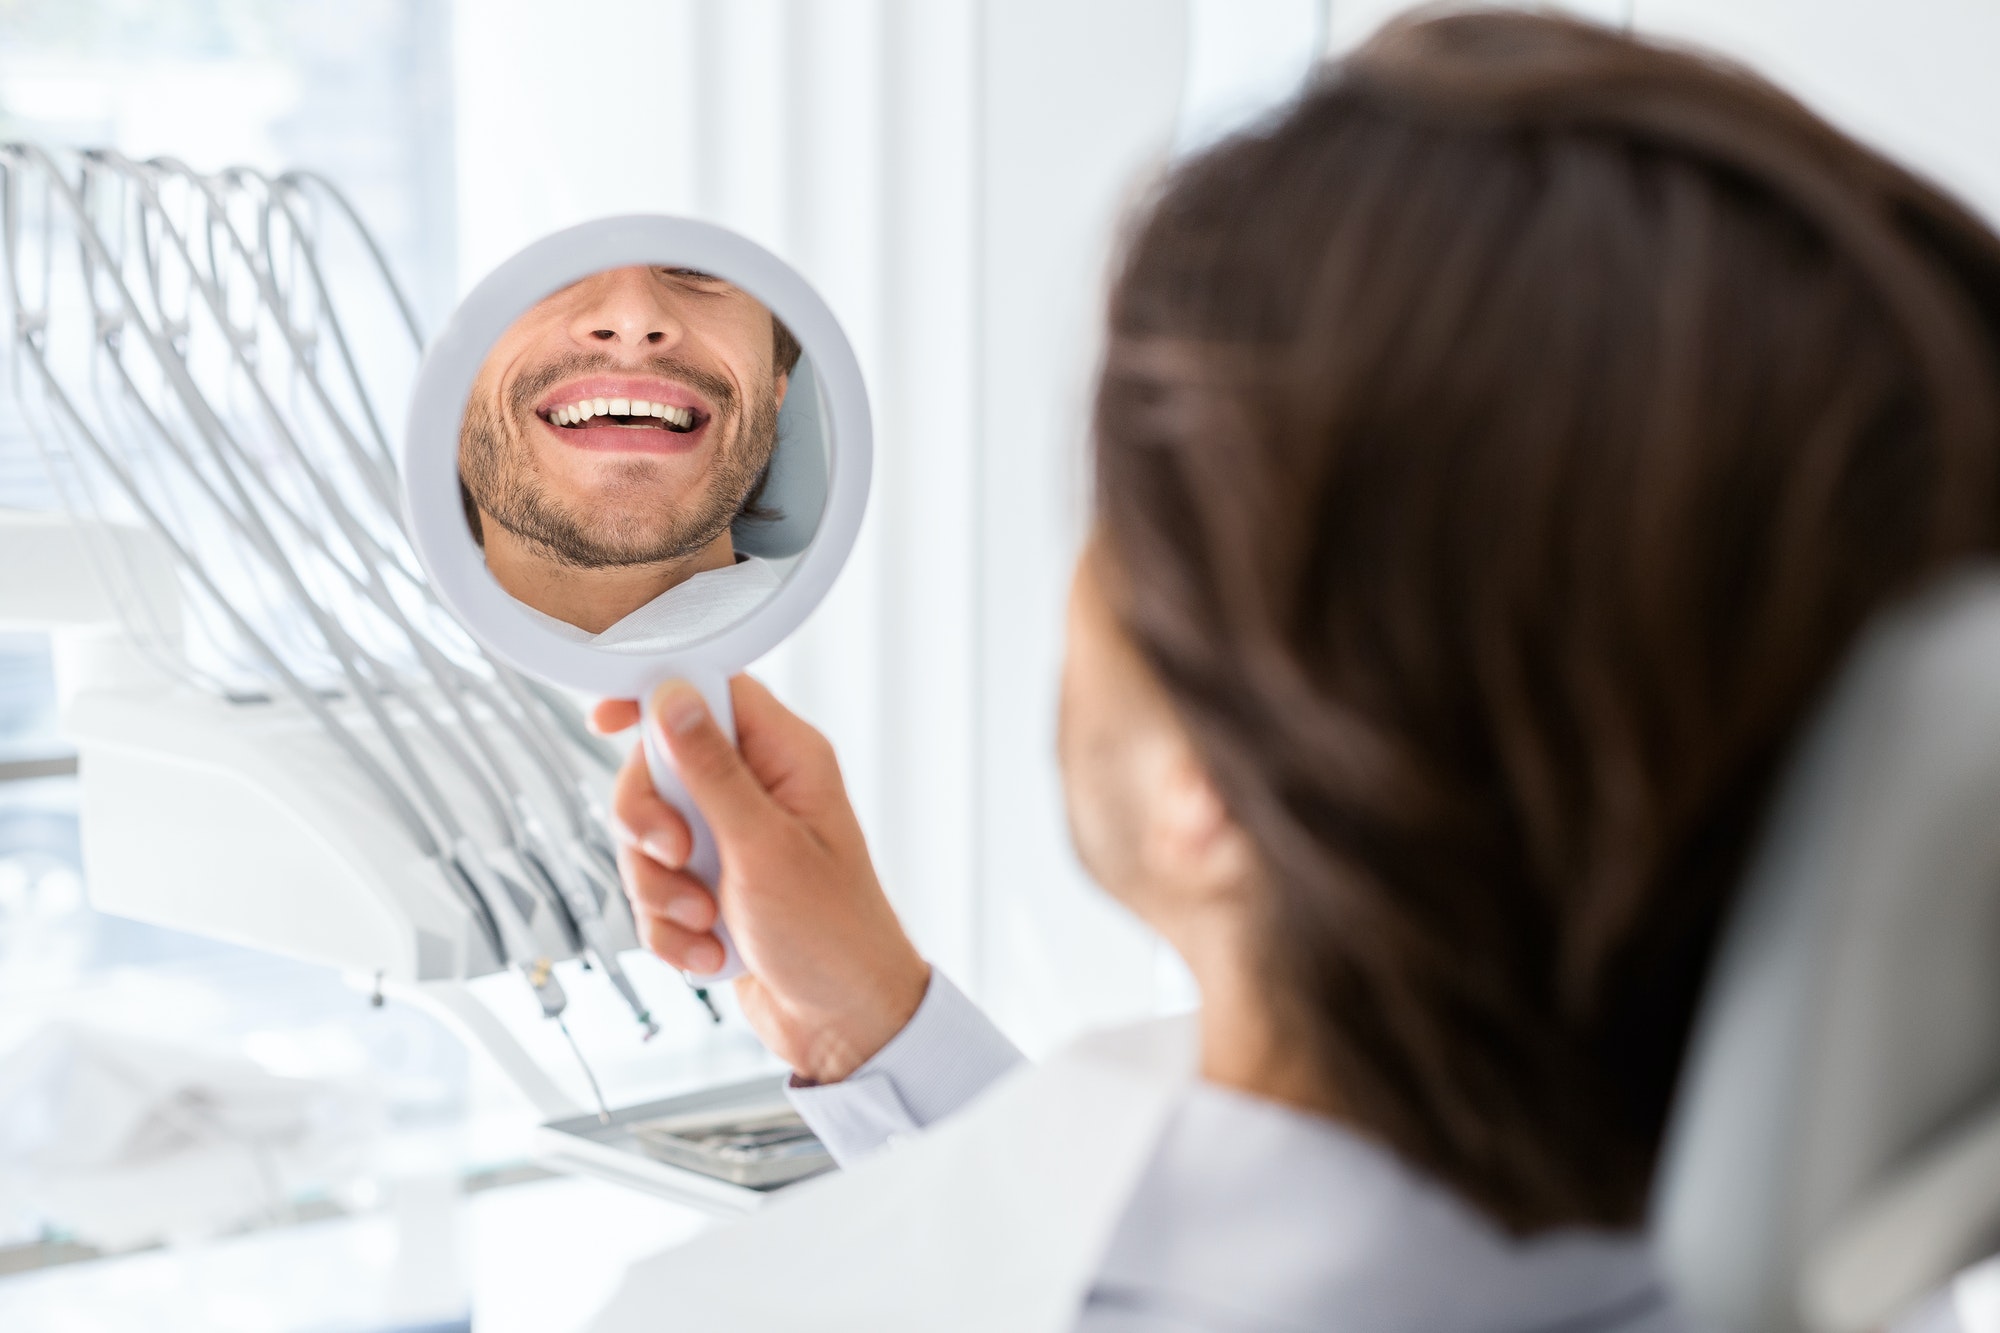 Satisfied patient checking smile at mirror in dental clinic